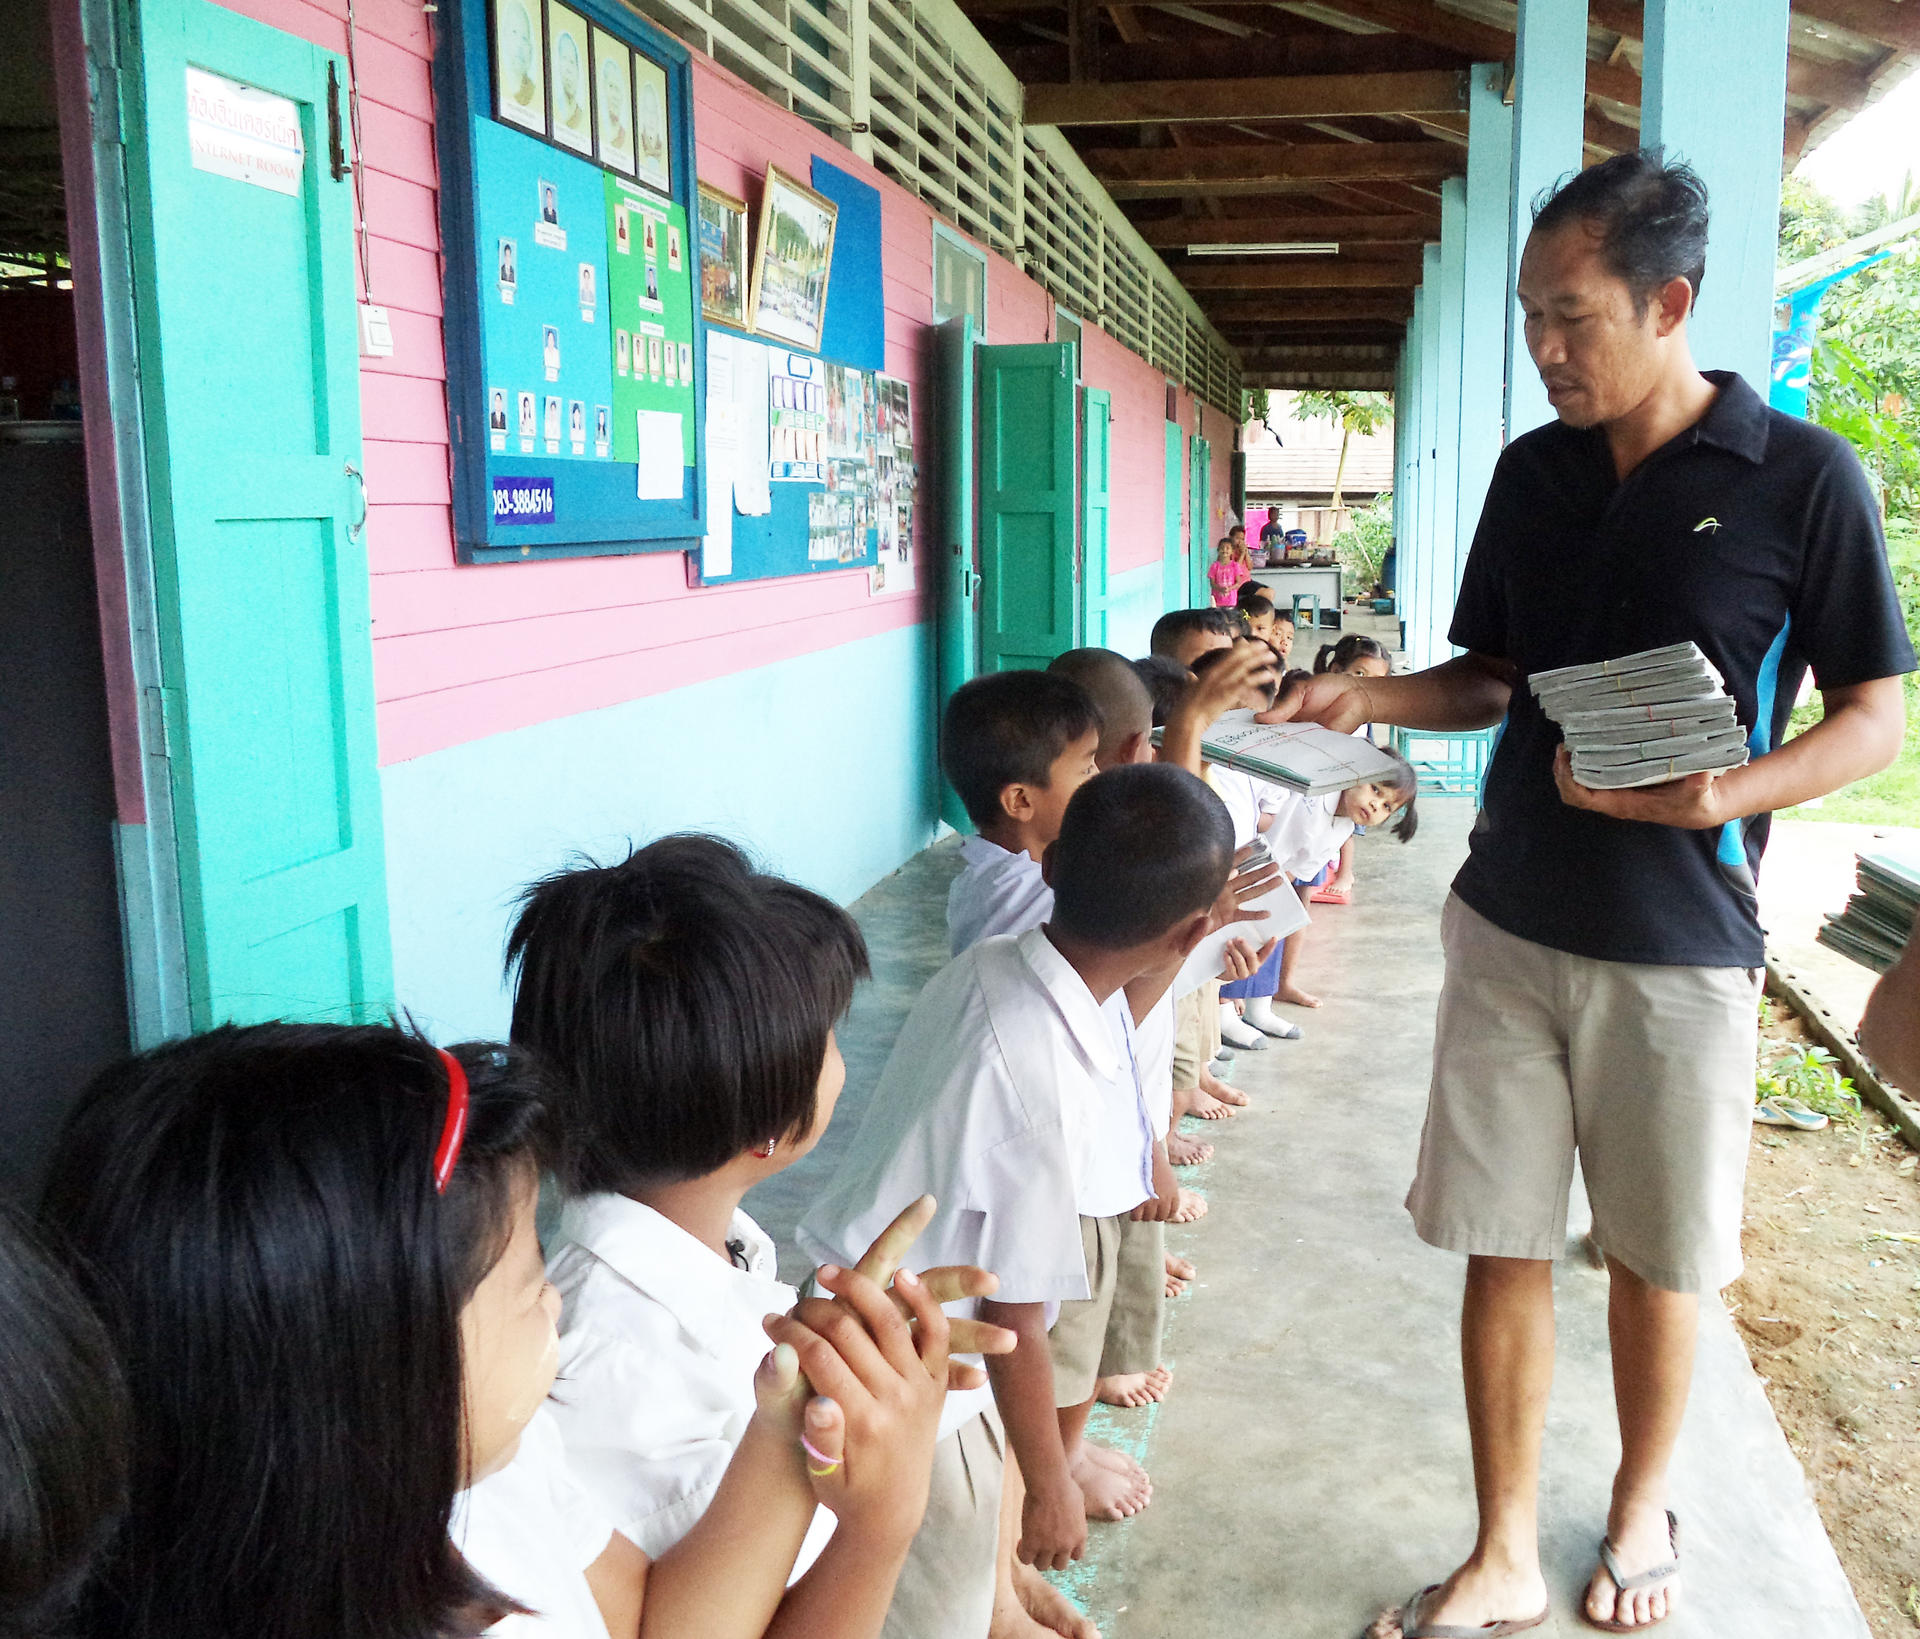 Samadthachai Pungpong and his students at the Borderless School in Ranong province, Thailand.